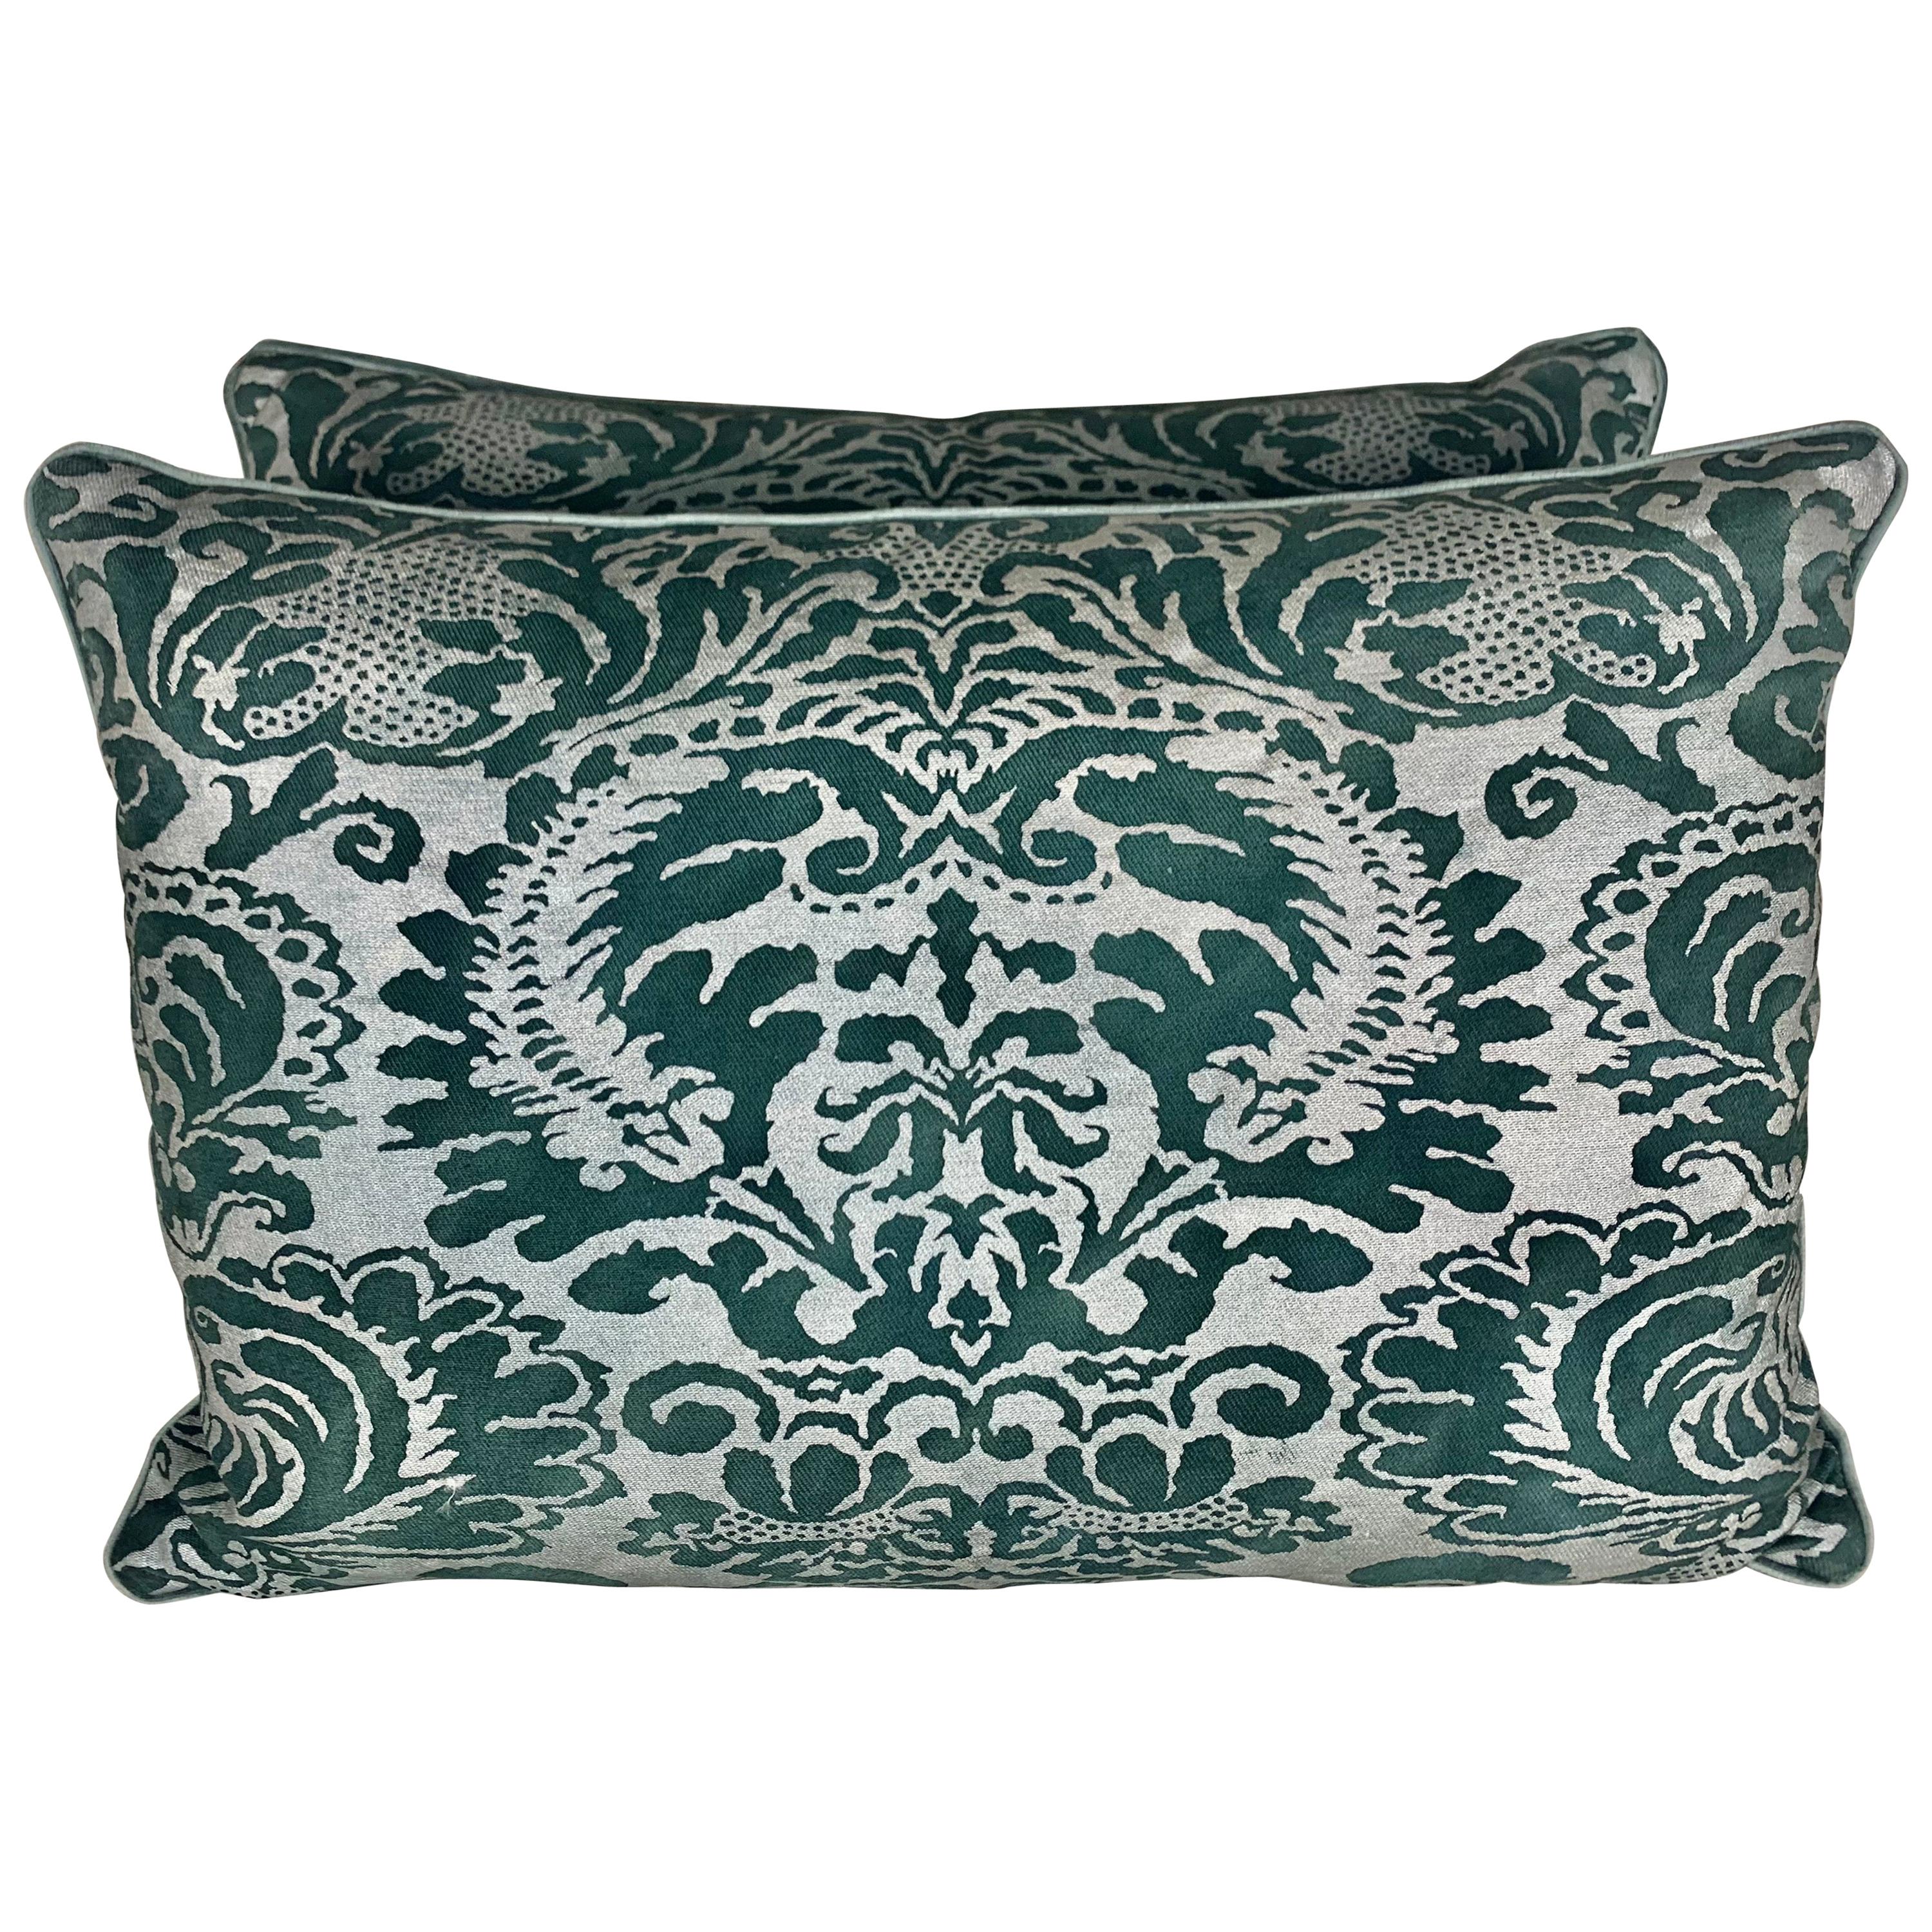 Rare Dark Greenish Black and Silver Fortuny Style Pillows